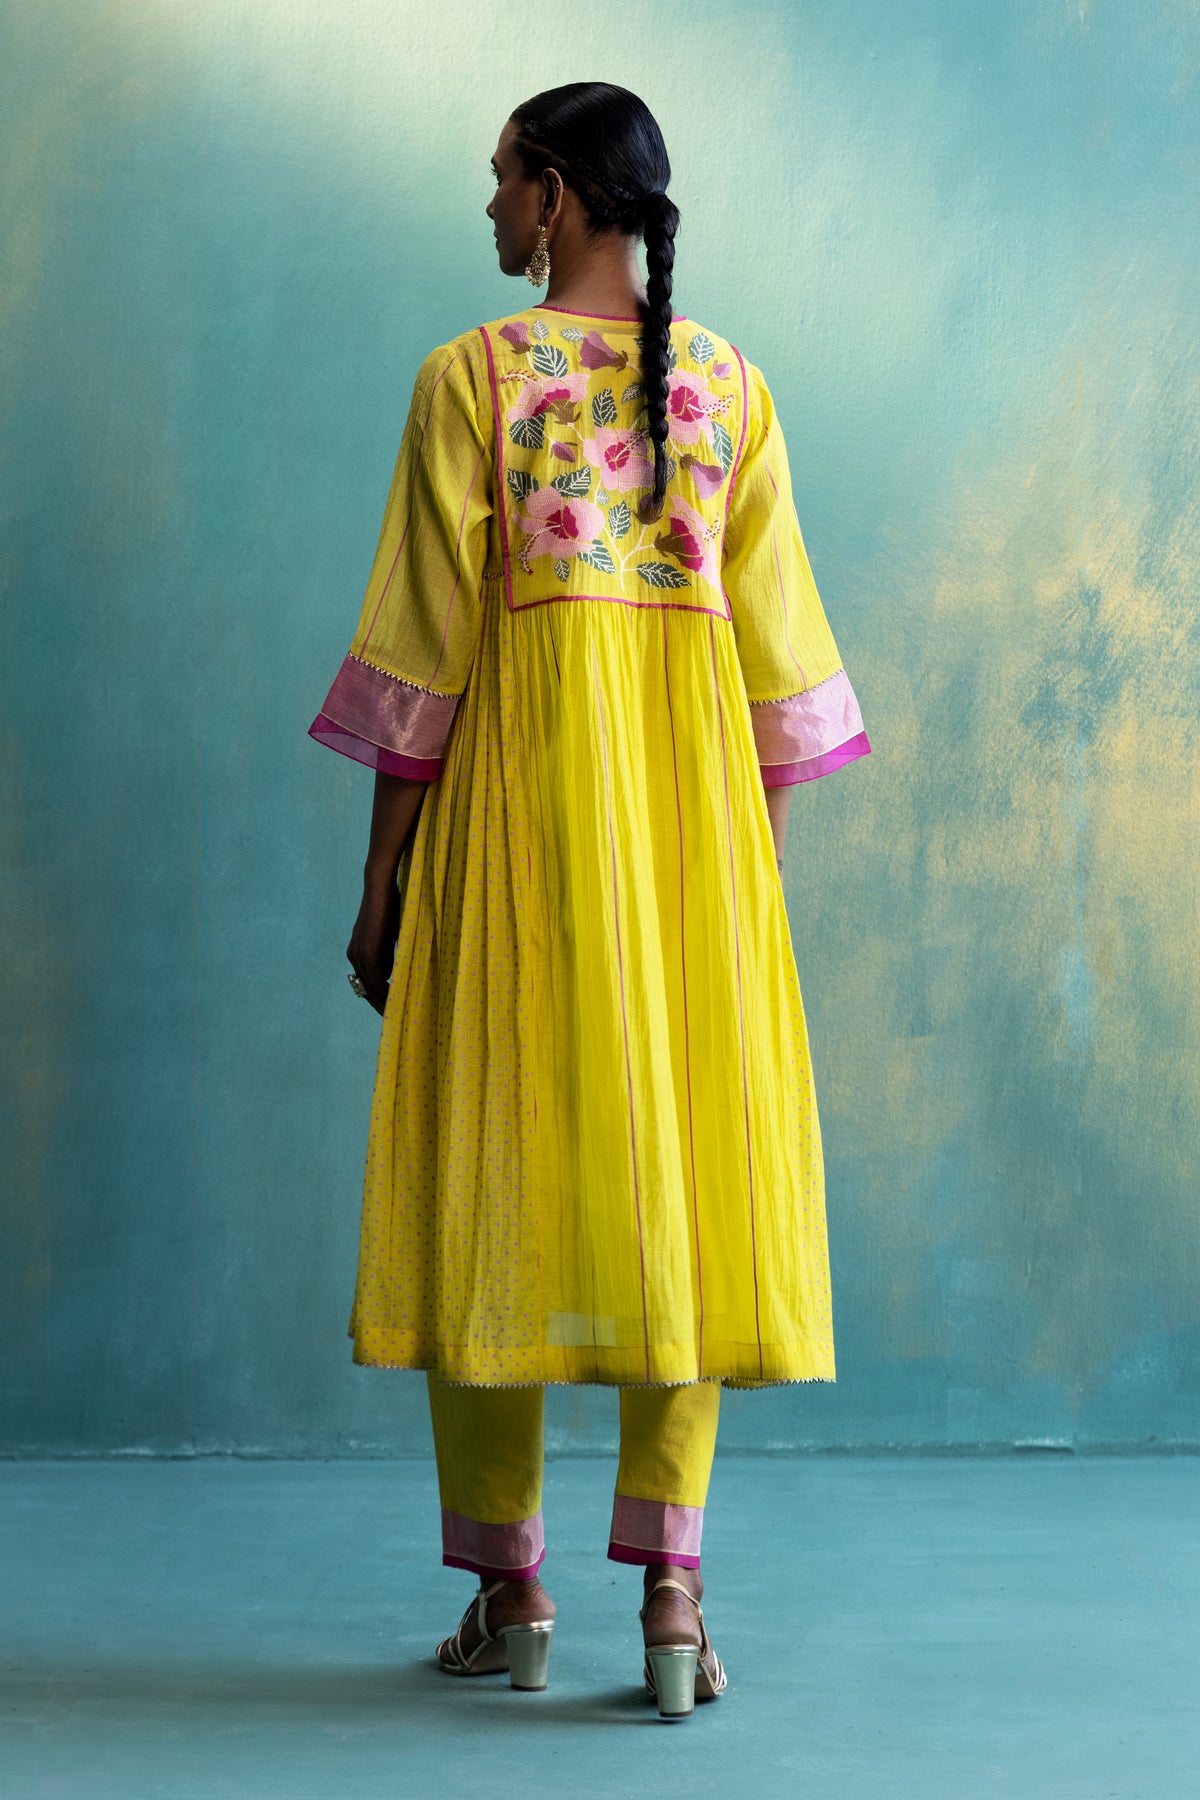 DIL-KASH YELLOW CHANDERI FRONT AND BACK FLORAL EMBROIDERY WITH SIDE PLEATS AND POLKAS CHANDERI KURTA